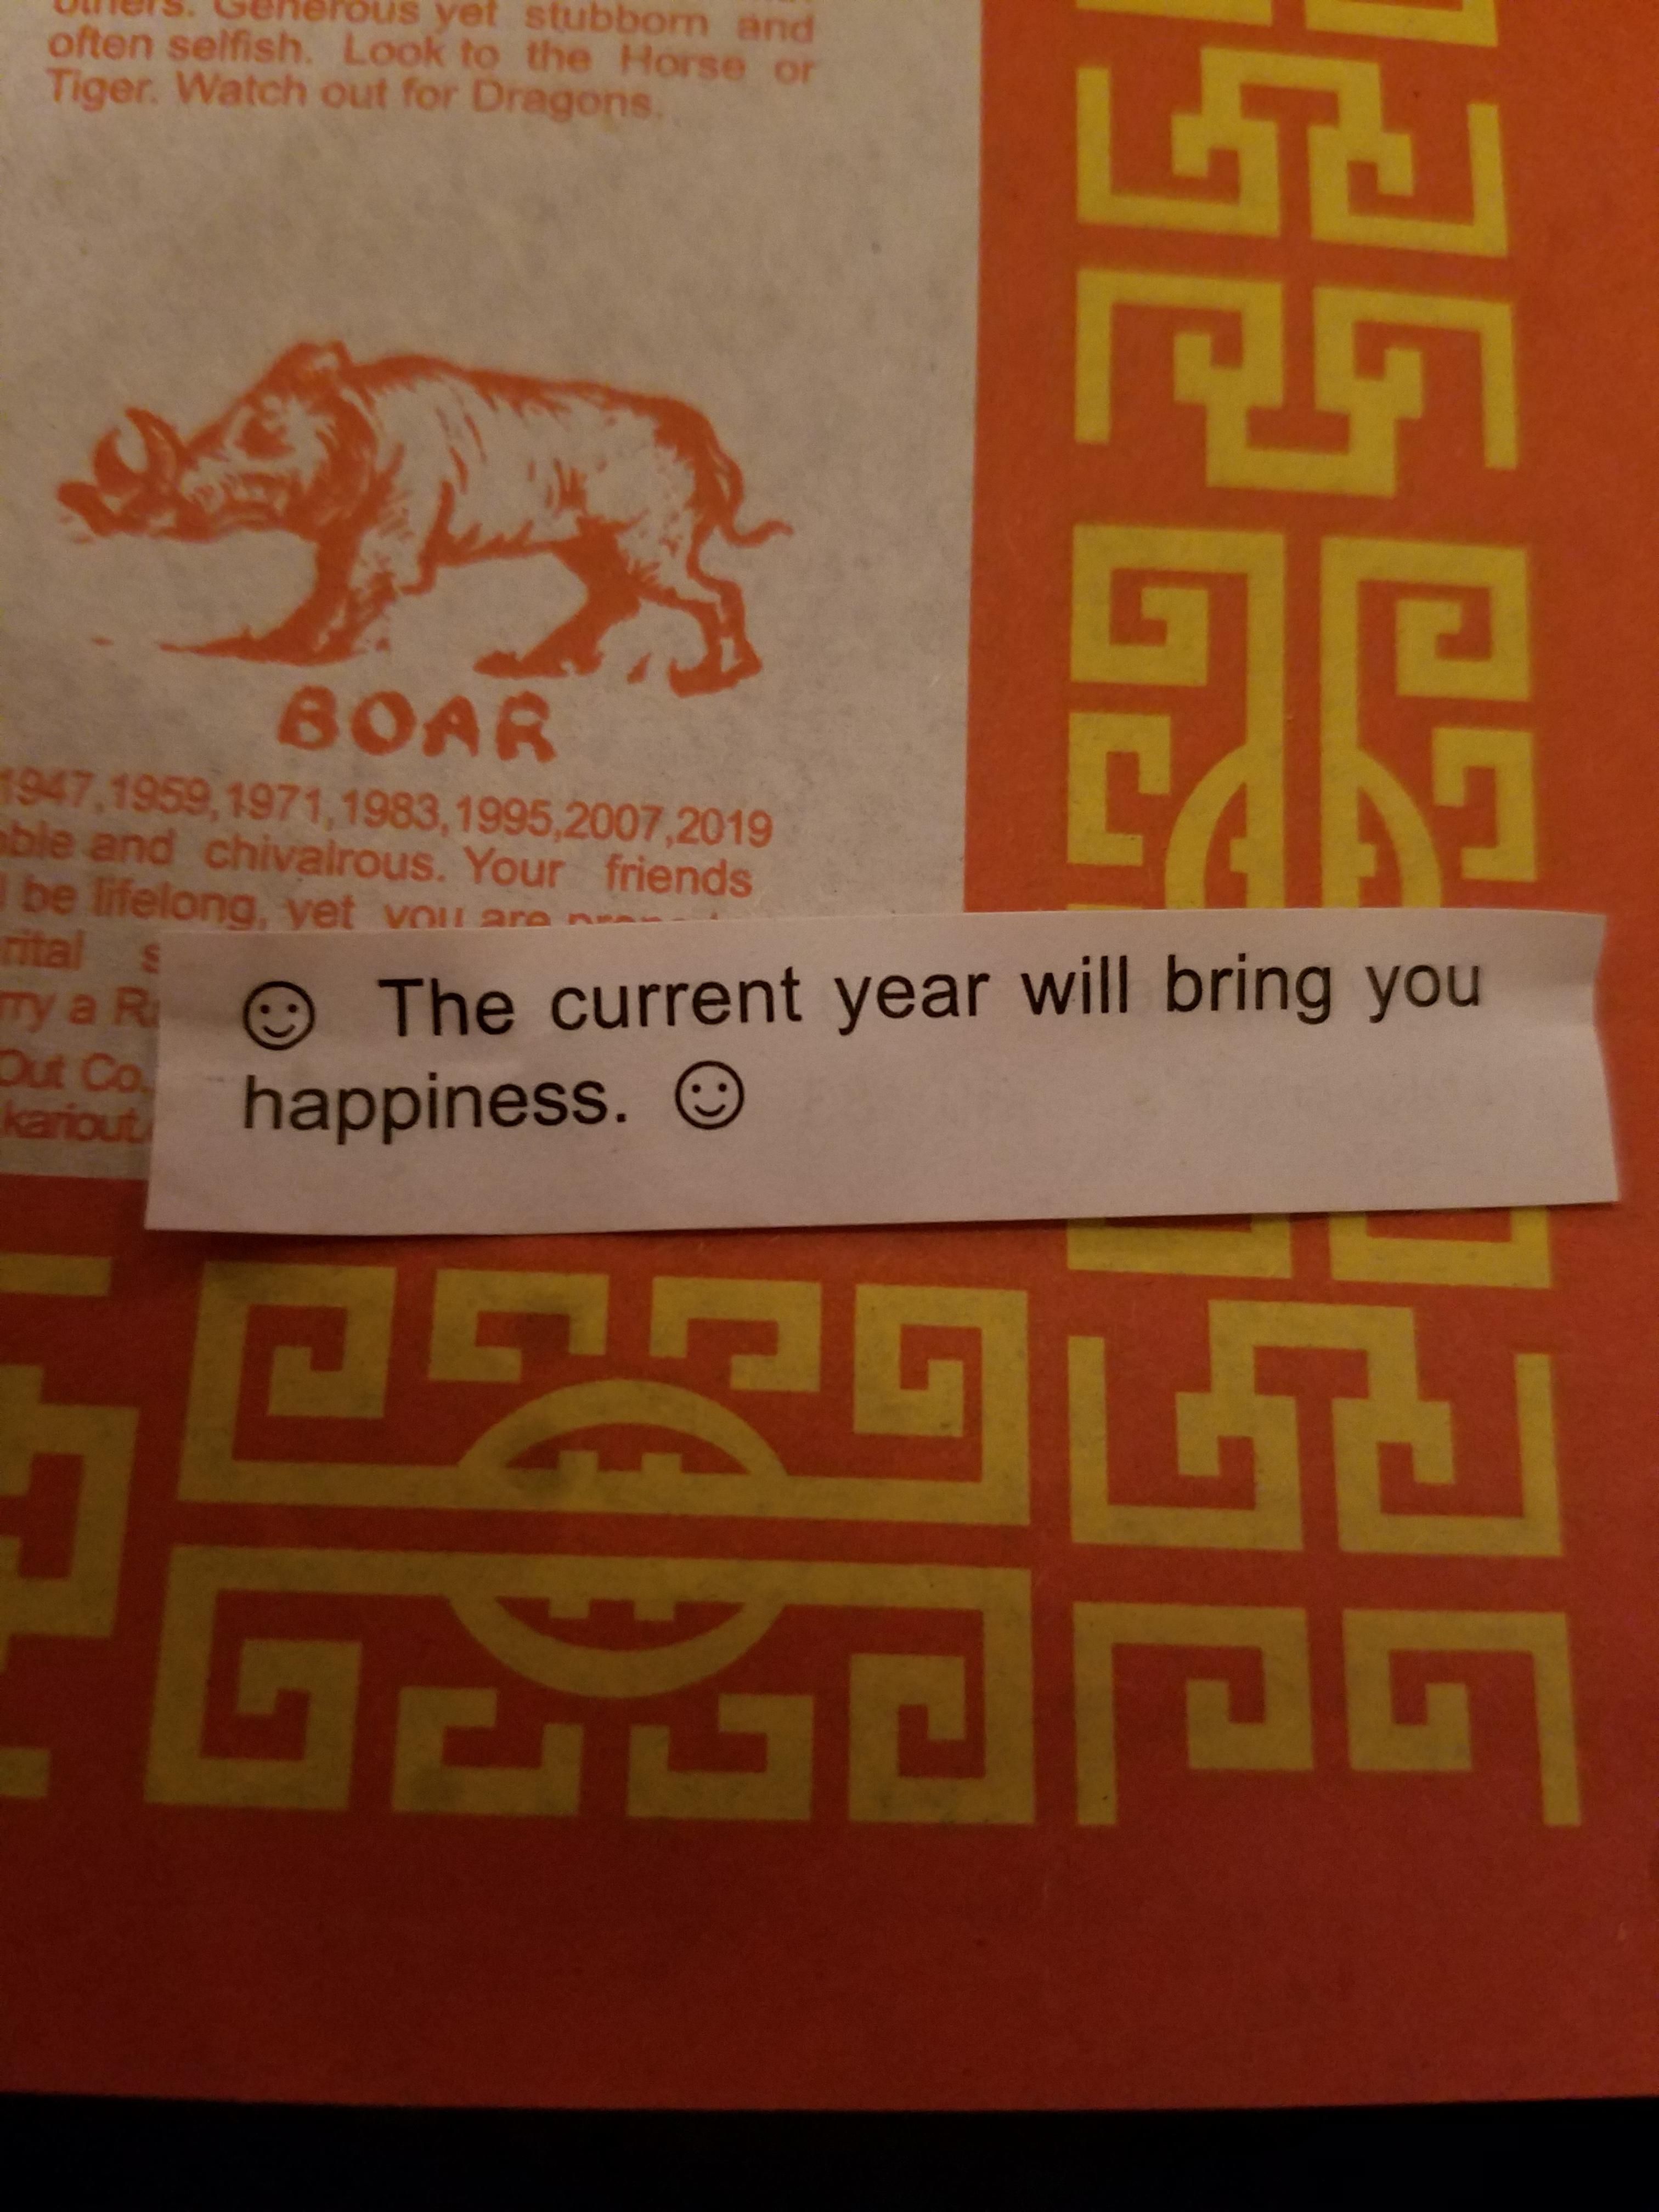 Need more time please. New Year's eve and we went to a great Chinese restaurant and this was my fortune. This gives me no time at all.